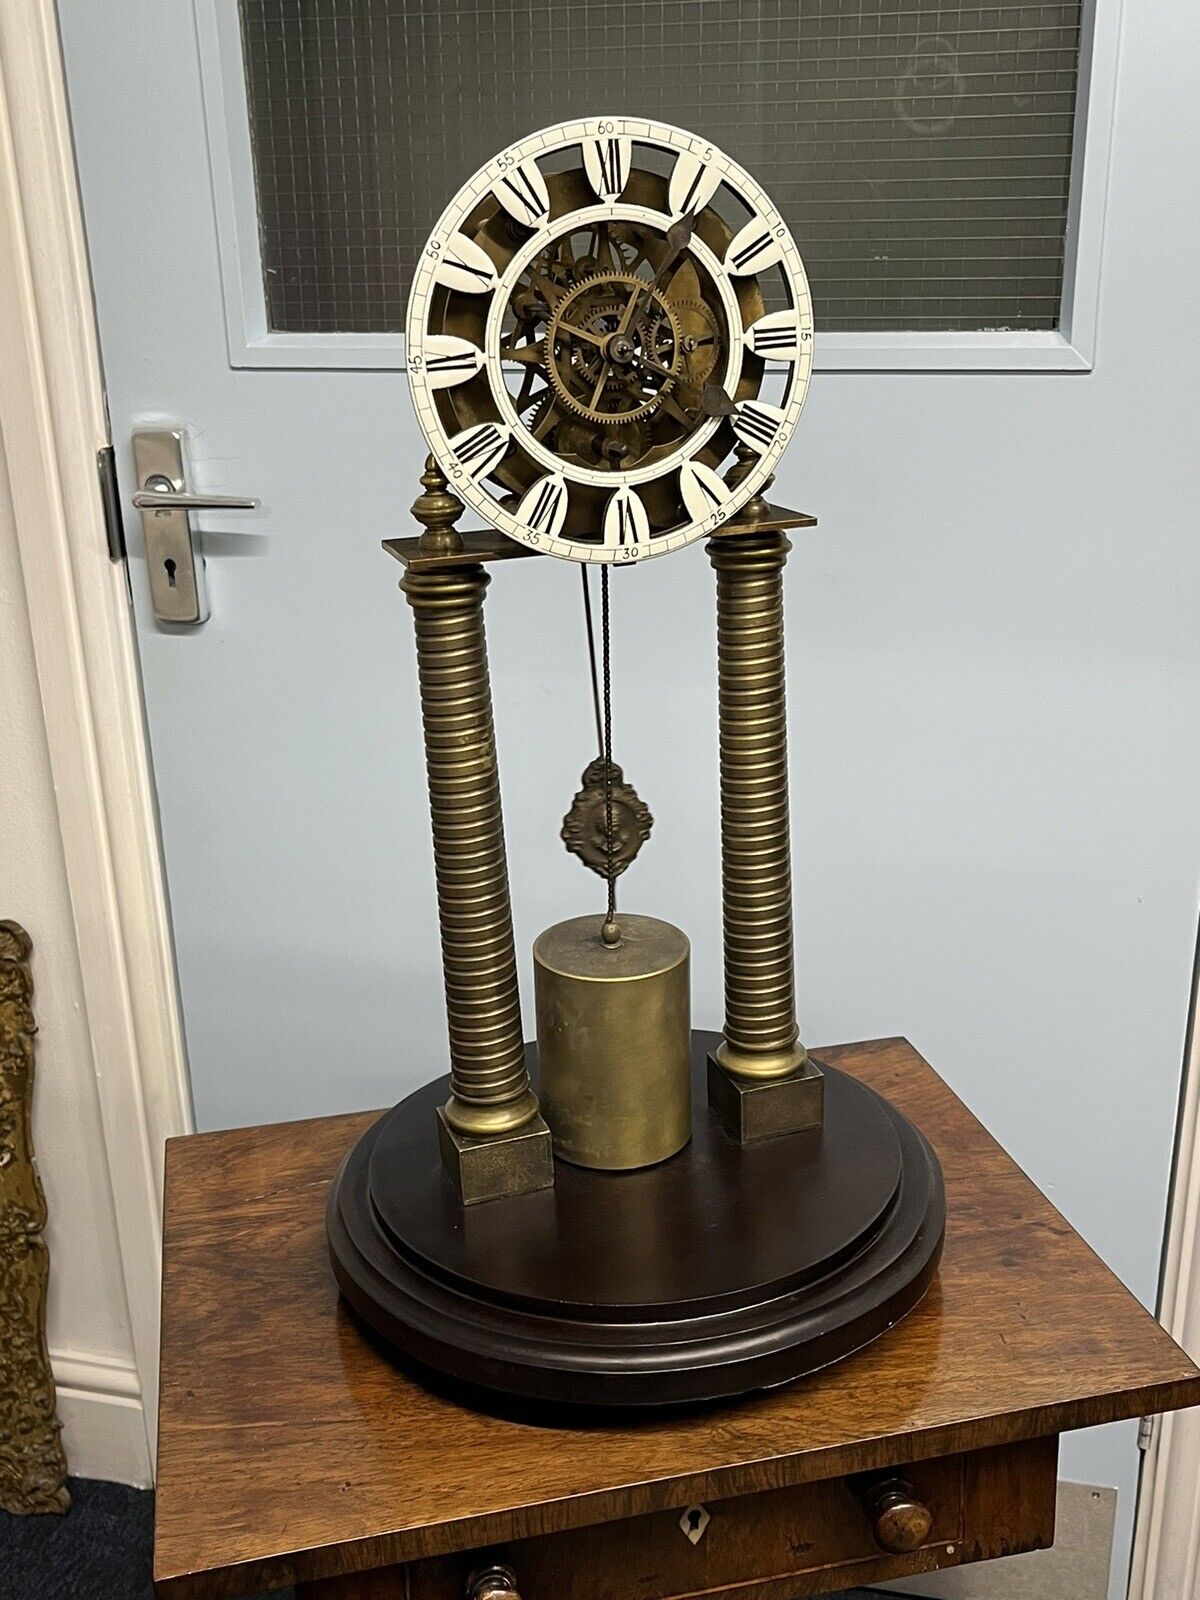 Skeleton Clock With Glass Dome. With Key. Large & Impressive